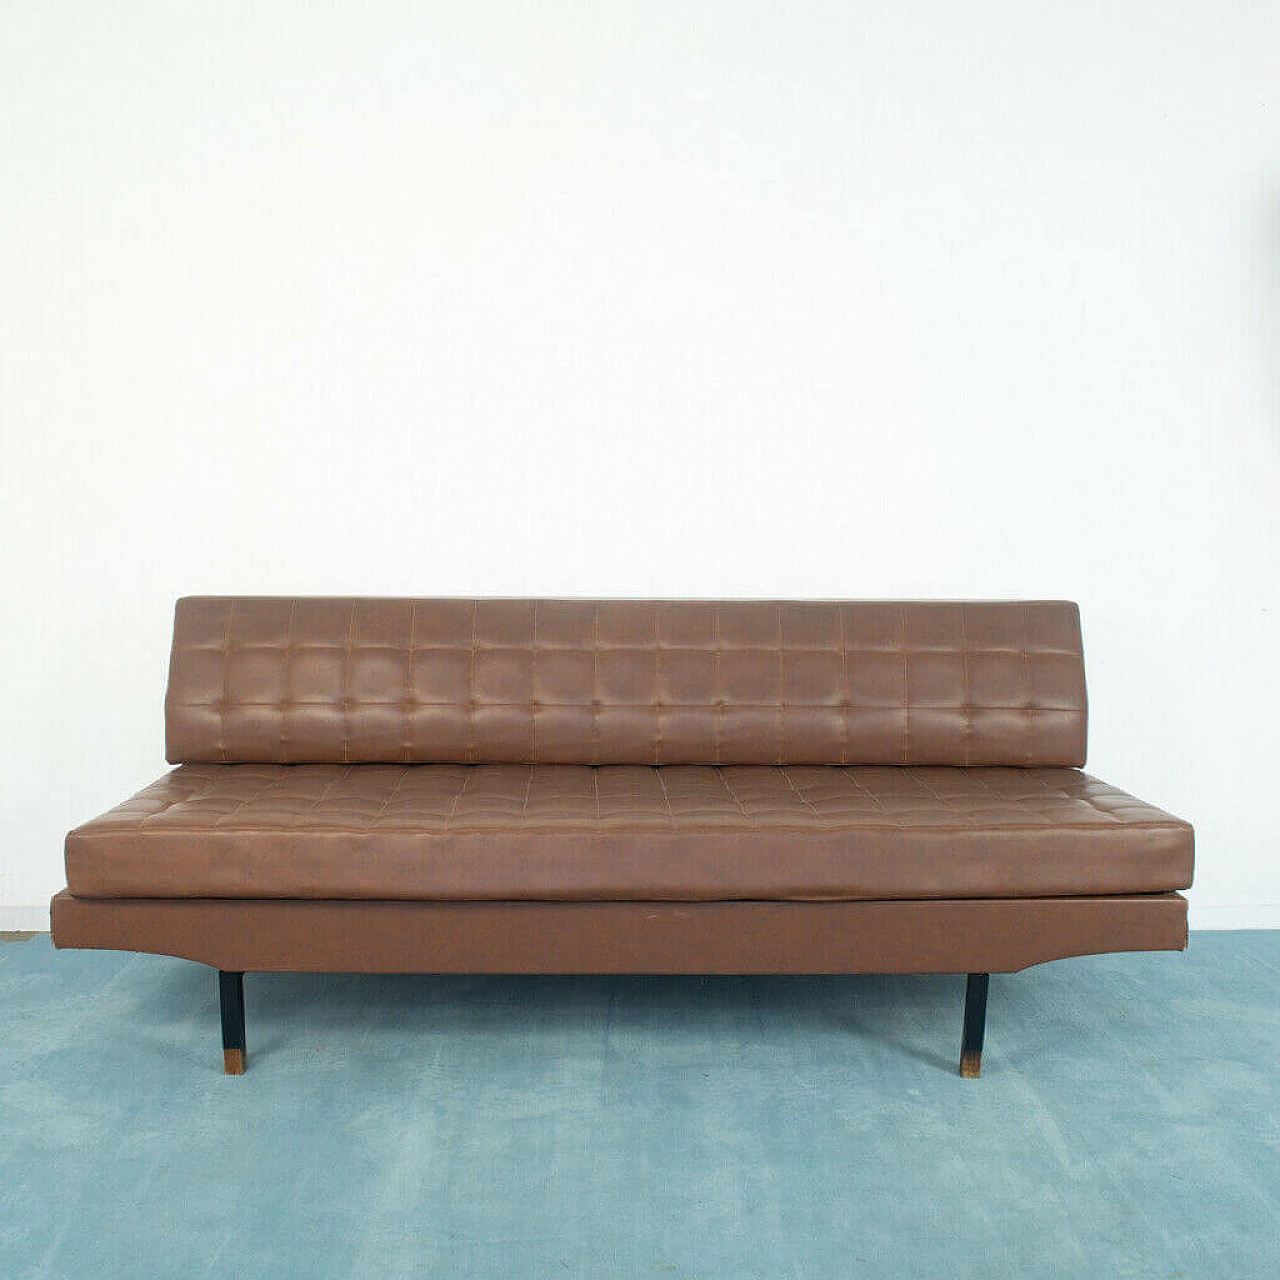 3-Seater sofa or daybed by Marco Zanuso for Flexform, 1950s 1183336